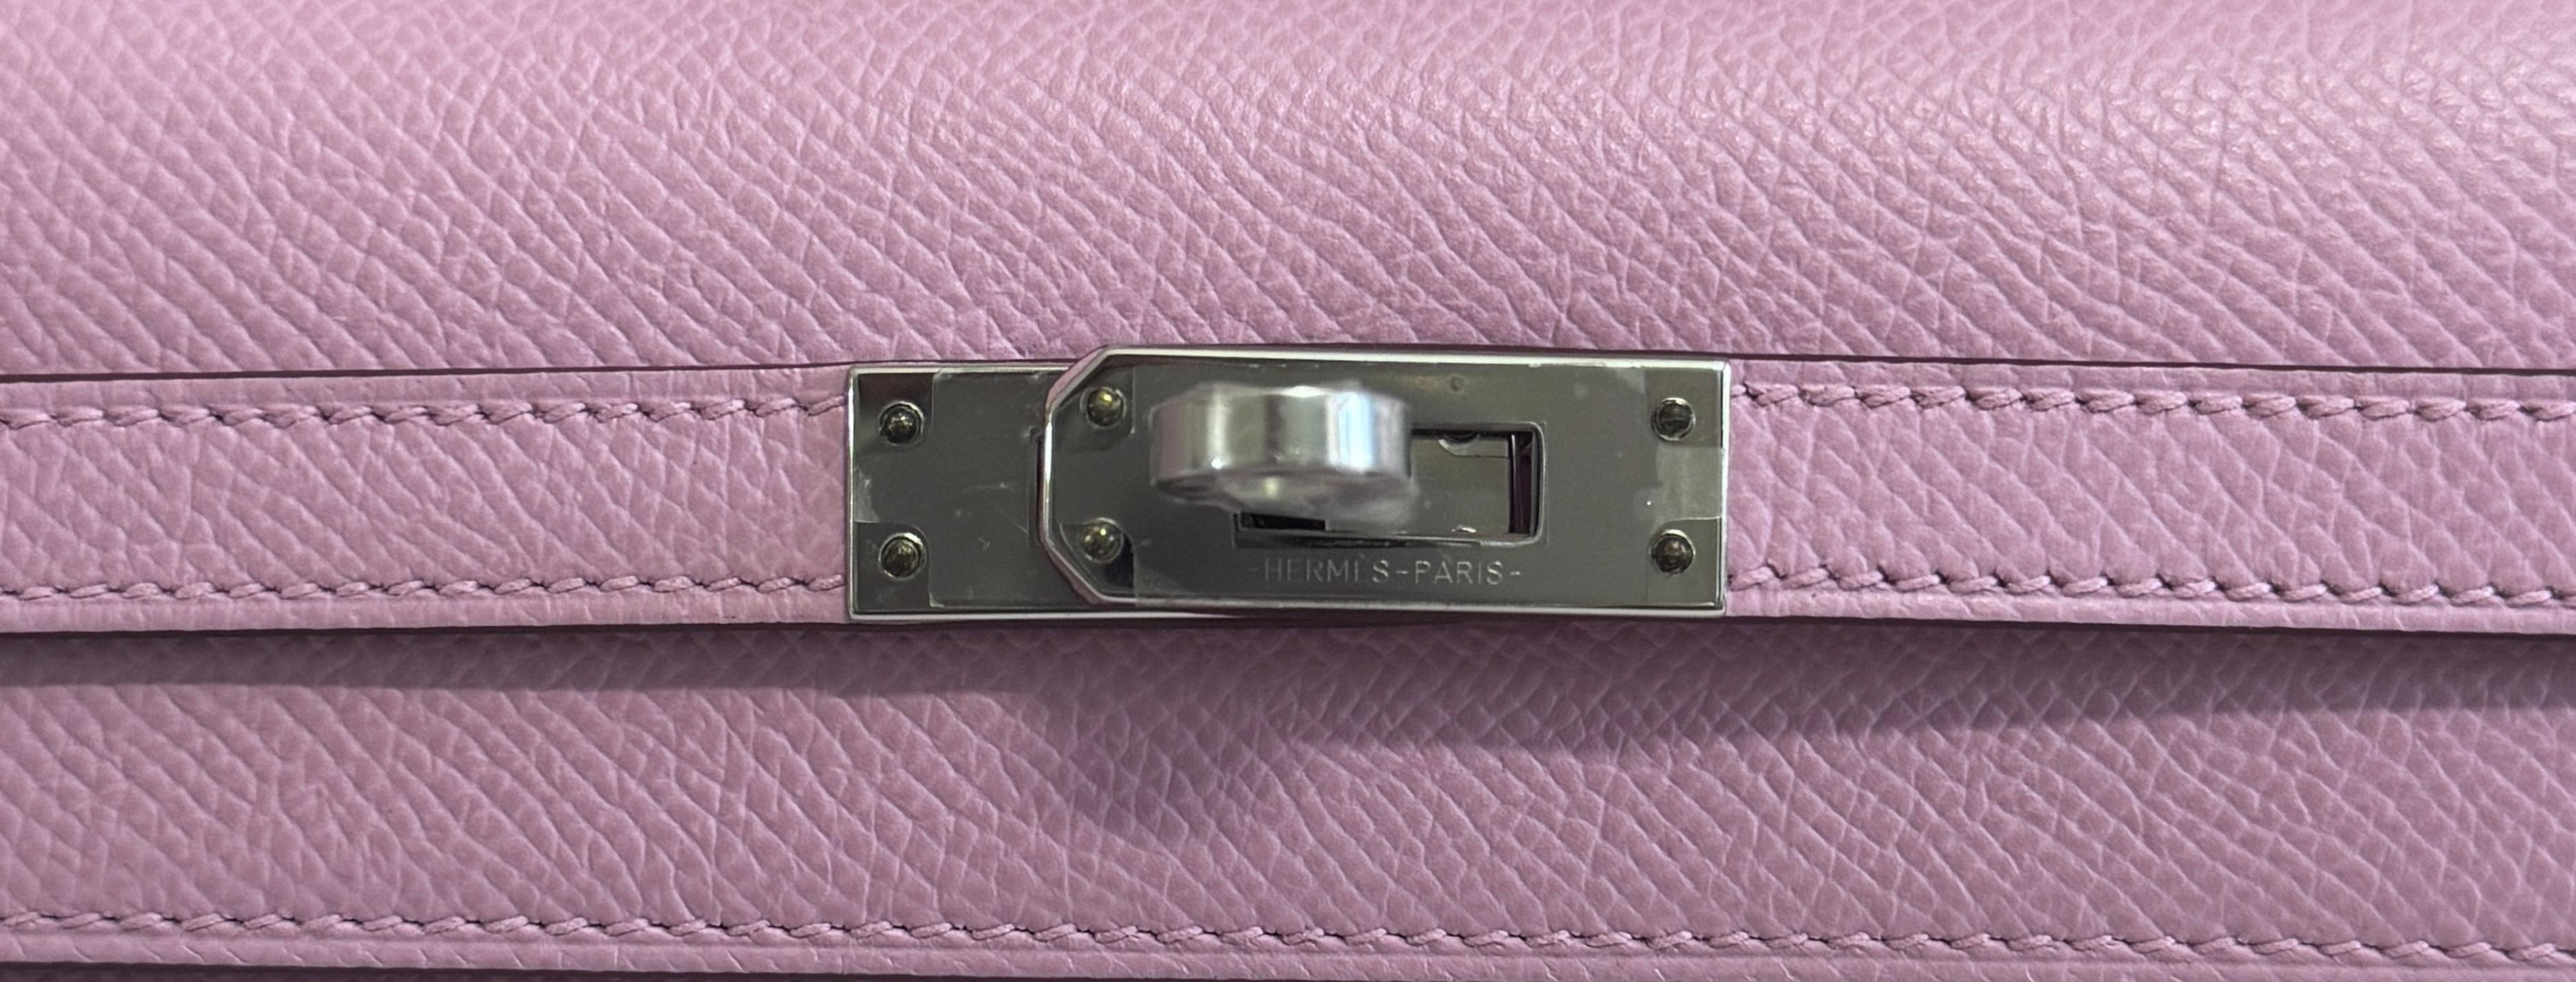 As New RARE Most Coveted Hermes Kelly 25 Sellier Mauve Sylvester Epsom Leather , Complimented by Palladium Hardware. AS NEW Z STAMP 2021.

Shop with confidence from Lux Addicts. Authenticity Guaranteed!